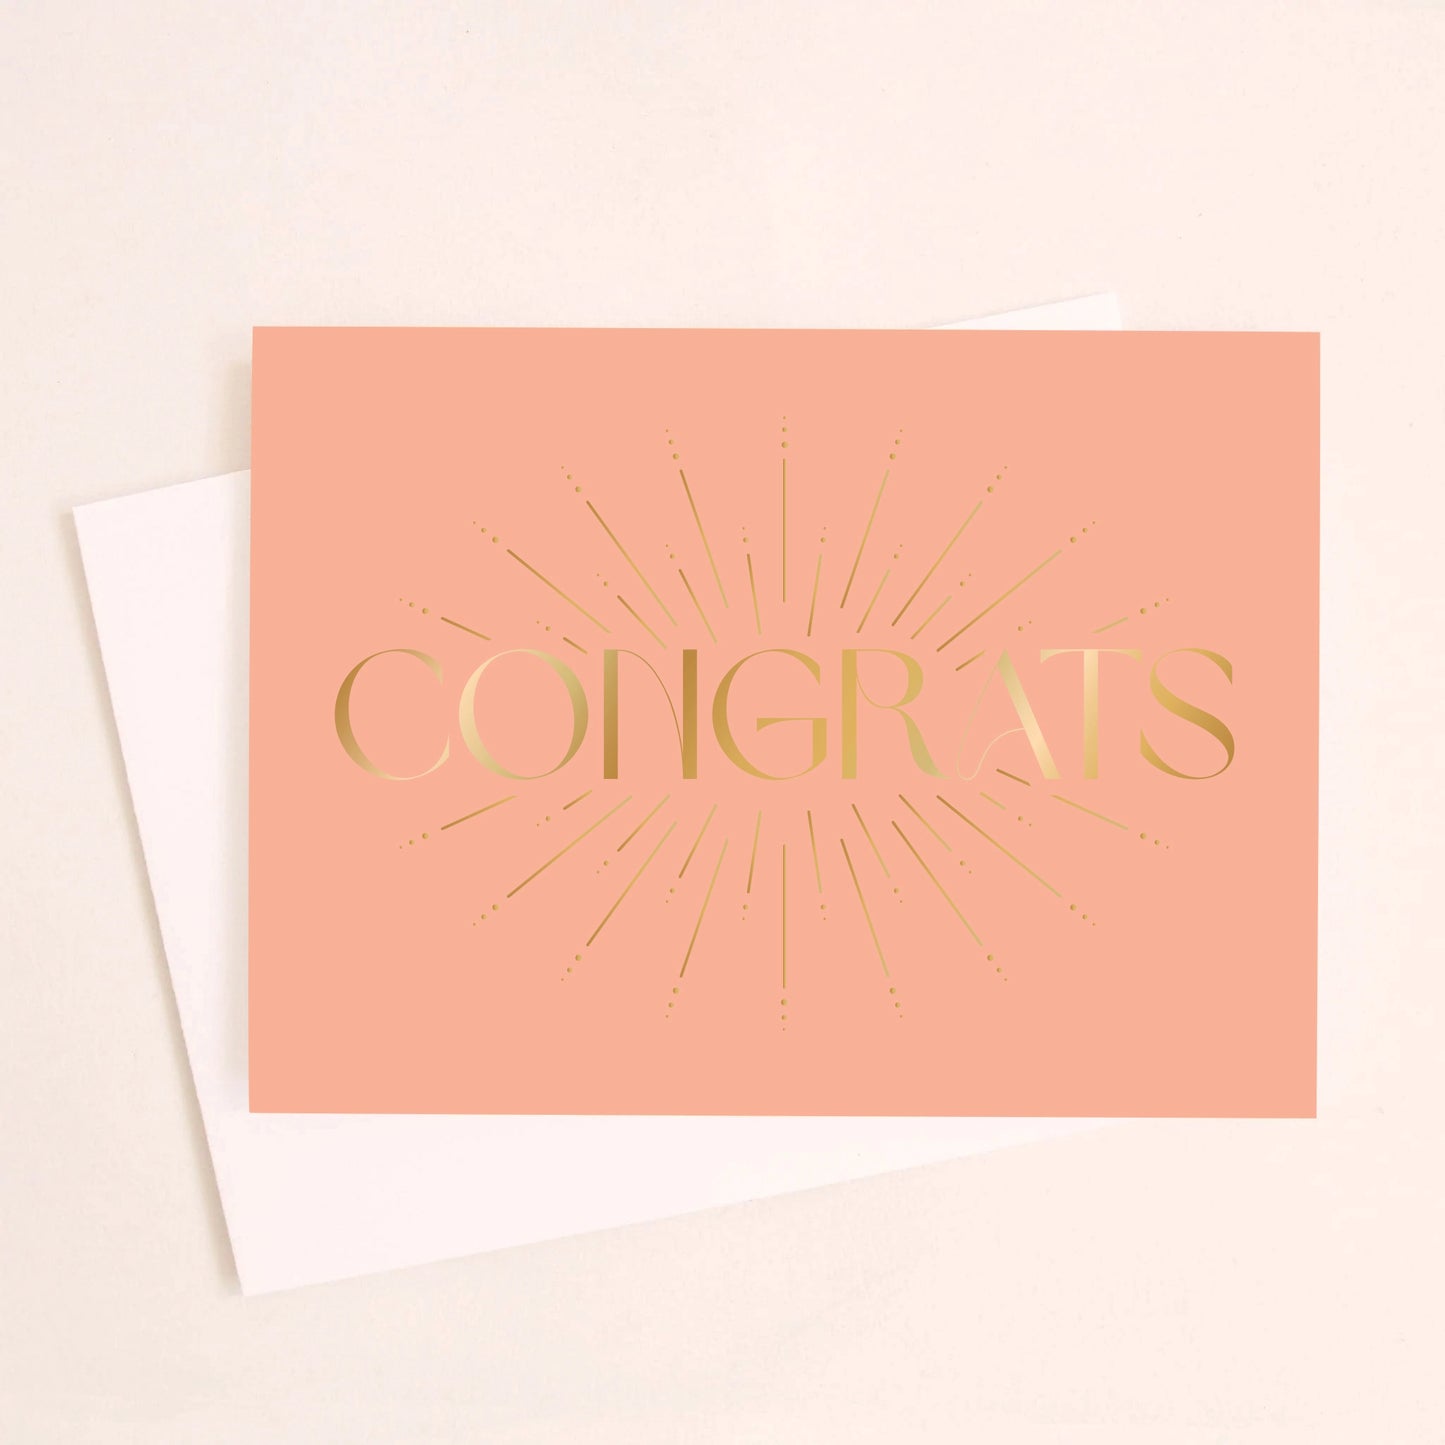 On an ivory background is a salmon colored greeting card with gold foil text that reads, "Congrats" along with a white envelope.